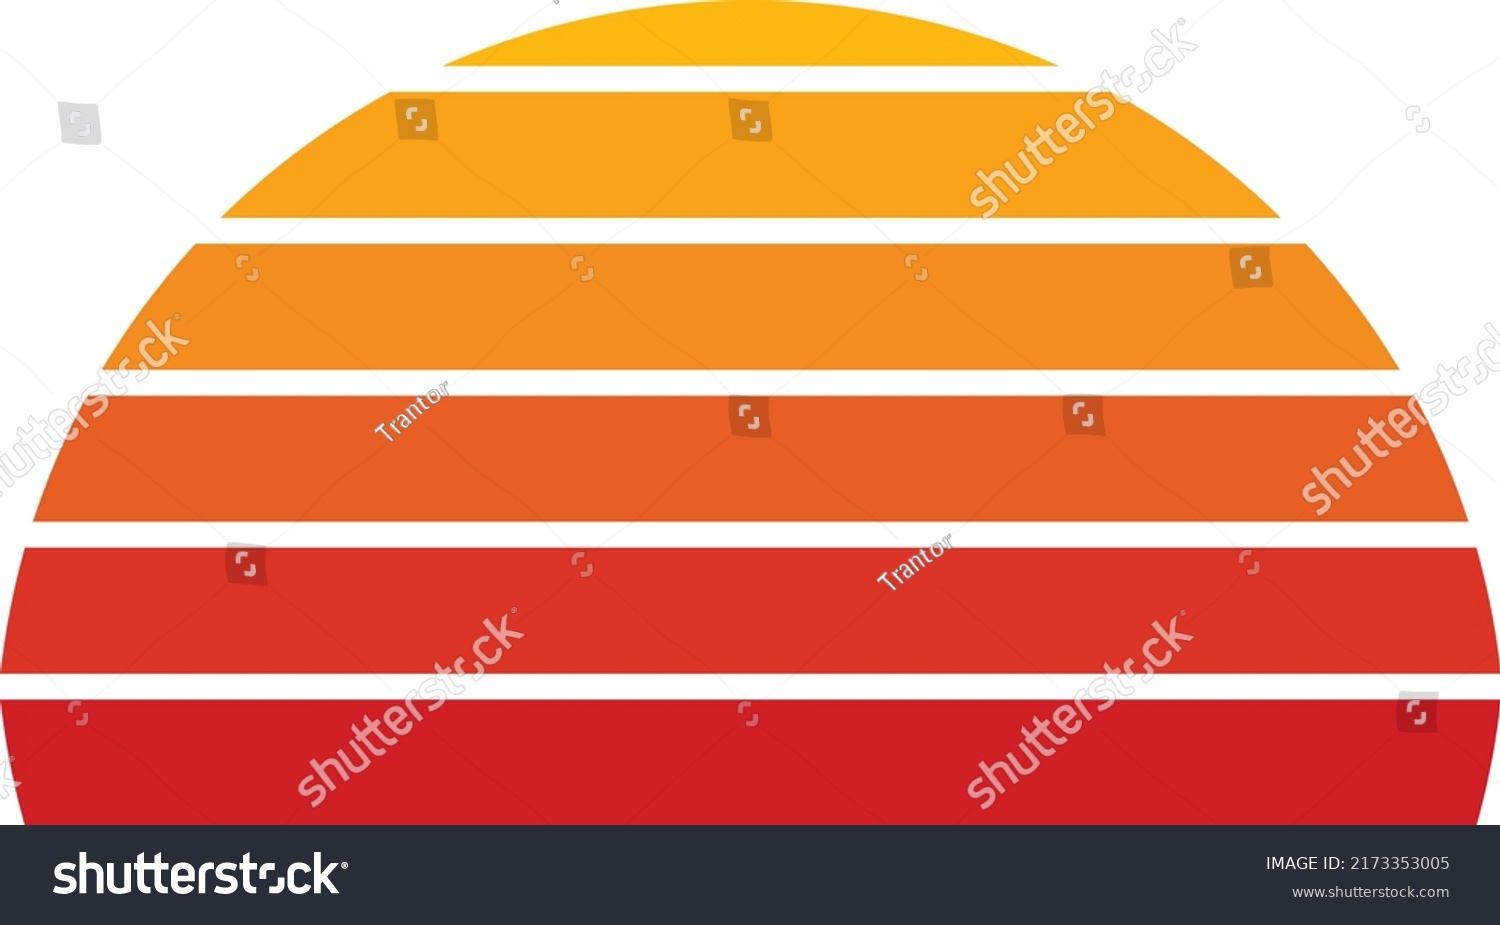 SVG of Abstract retro sunset vintage half-circle stripes on a white background. For print on demand, t-shirt design, book covers, etc., this retro sunset with vintage style horizontal stripes is available svg